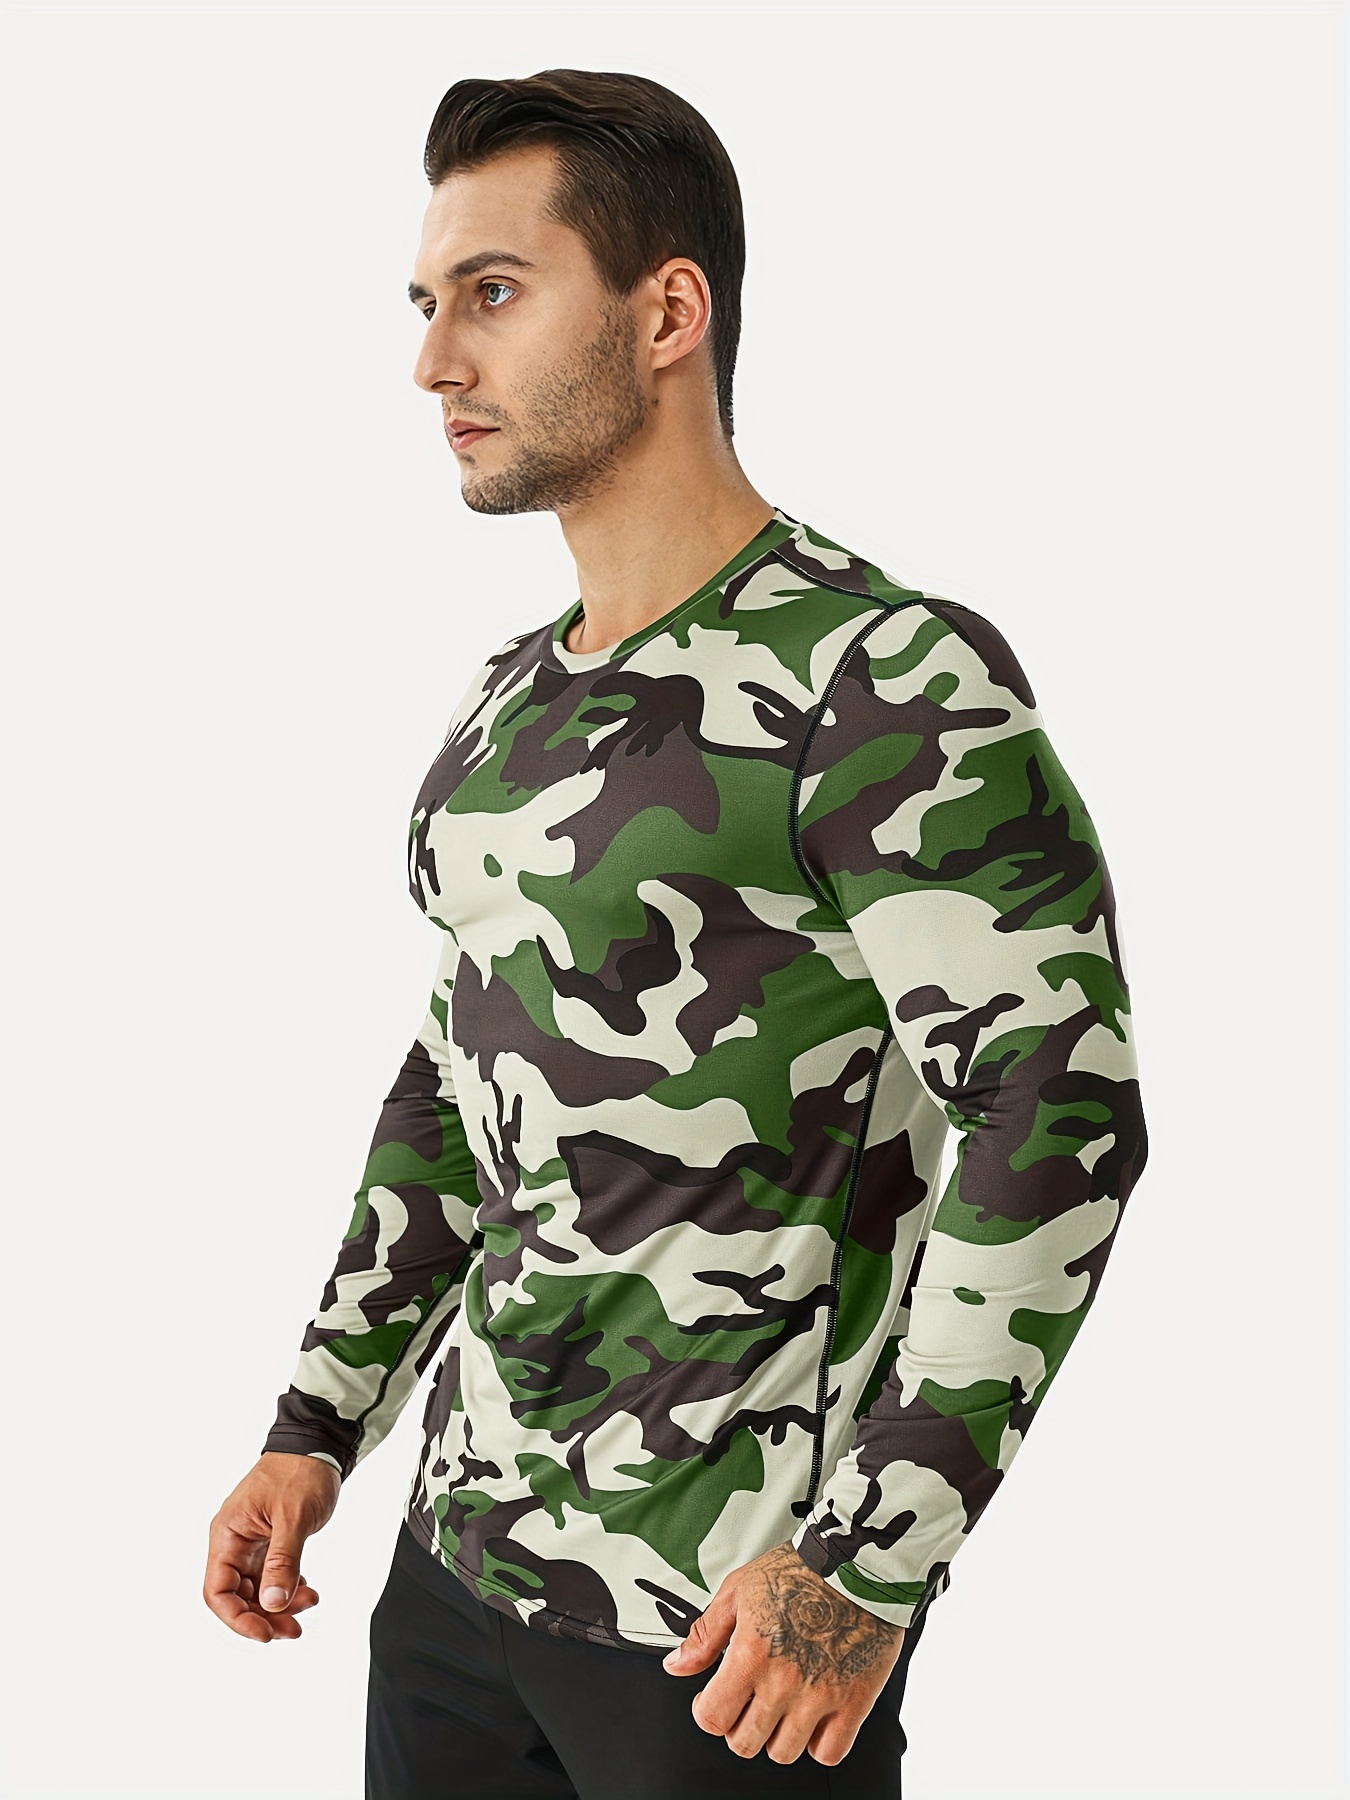 FATIGUE . MILITARY / ARMY GREEN T-SHIRT COTTON BLEND ROUND NECK